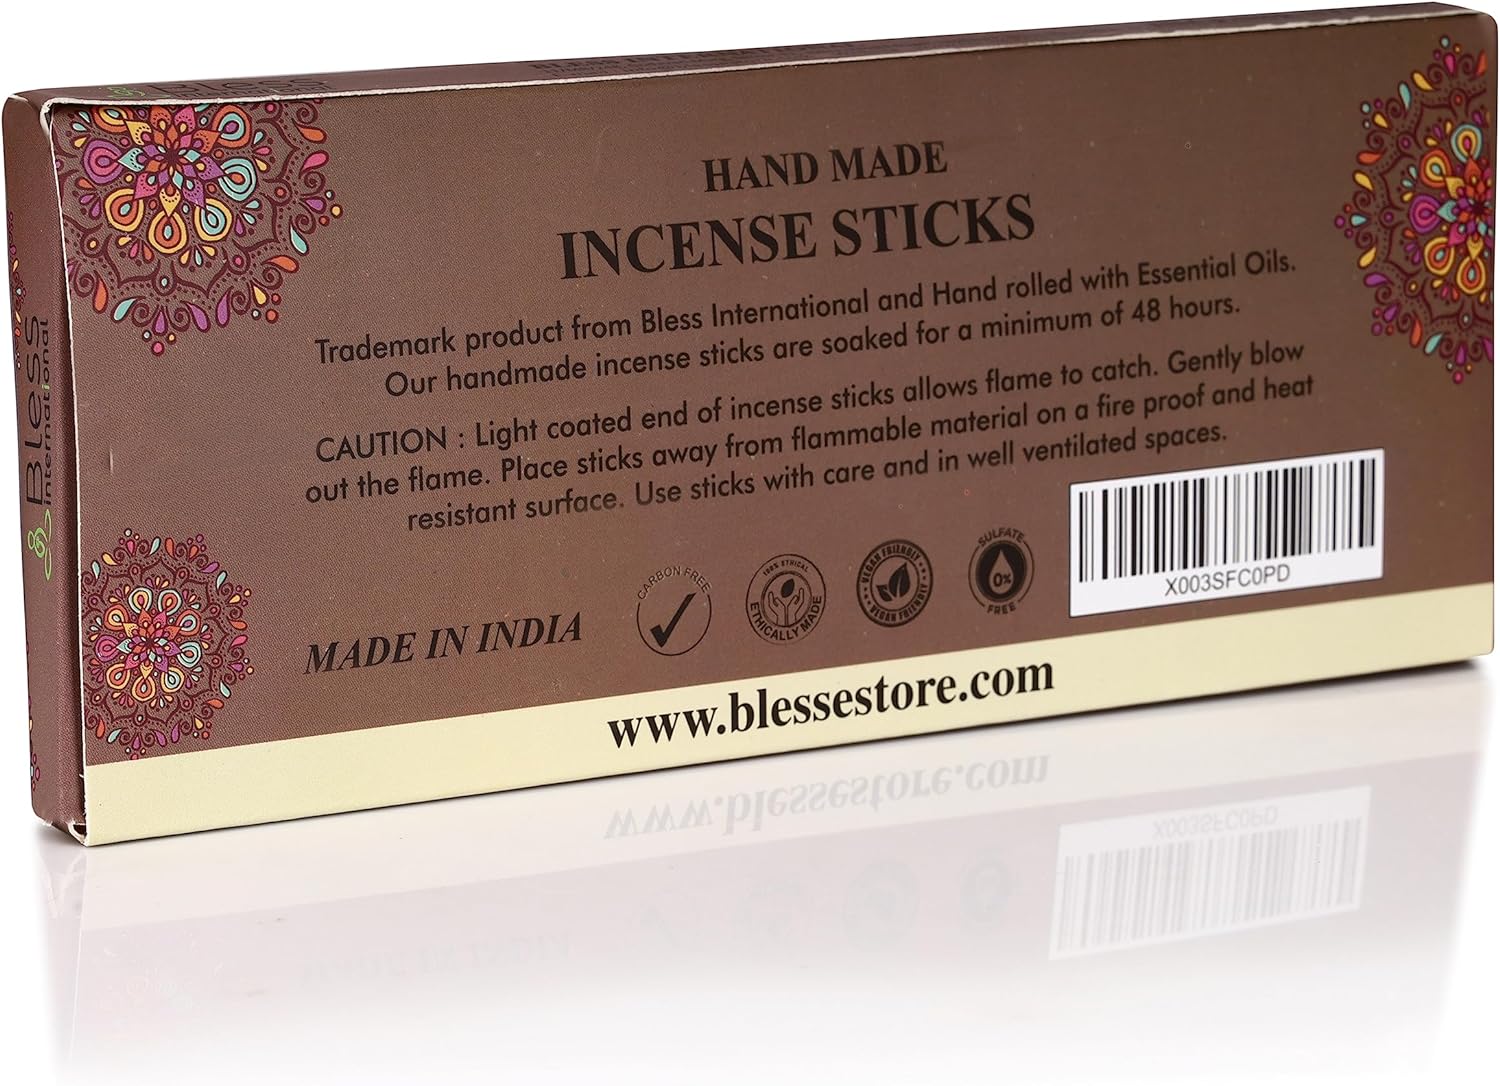 Bless-Sandalwood-Incense-Sticks 100%-Natural-Handmade-Hand-Dipped-Incense-Sticks Organic-Chemicals-Free for-Purification-Relaxation-Positivity-Yoga-Meditation The-Best-Woods-Scent (25 Sticks (40GM))